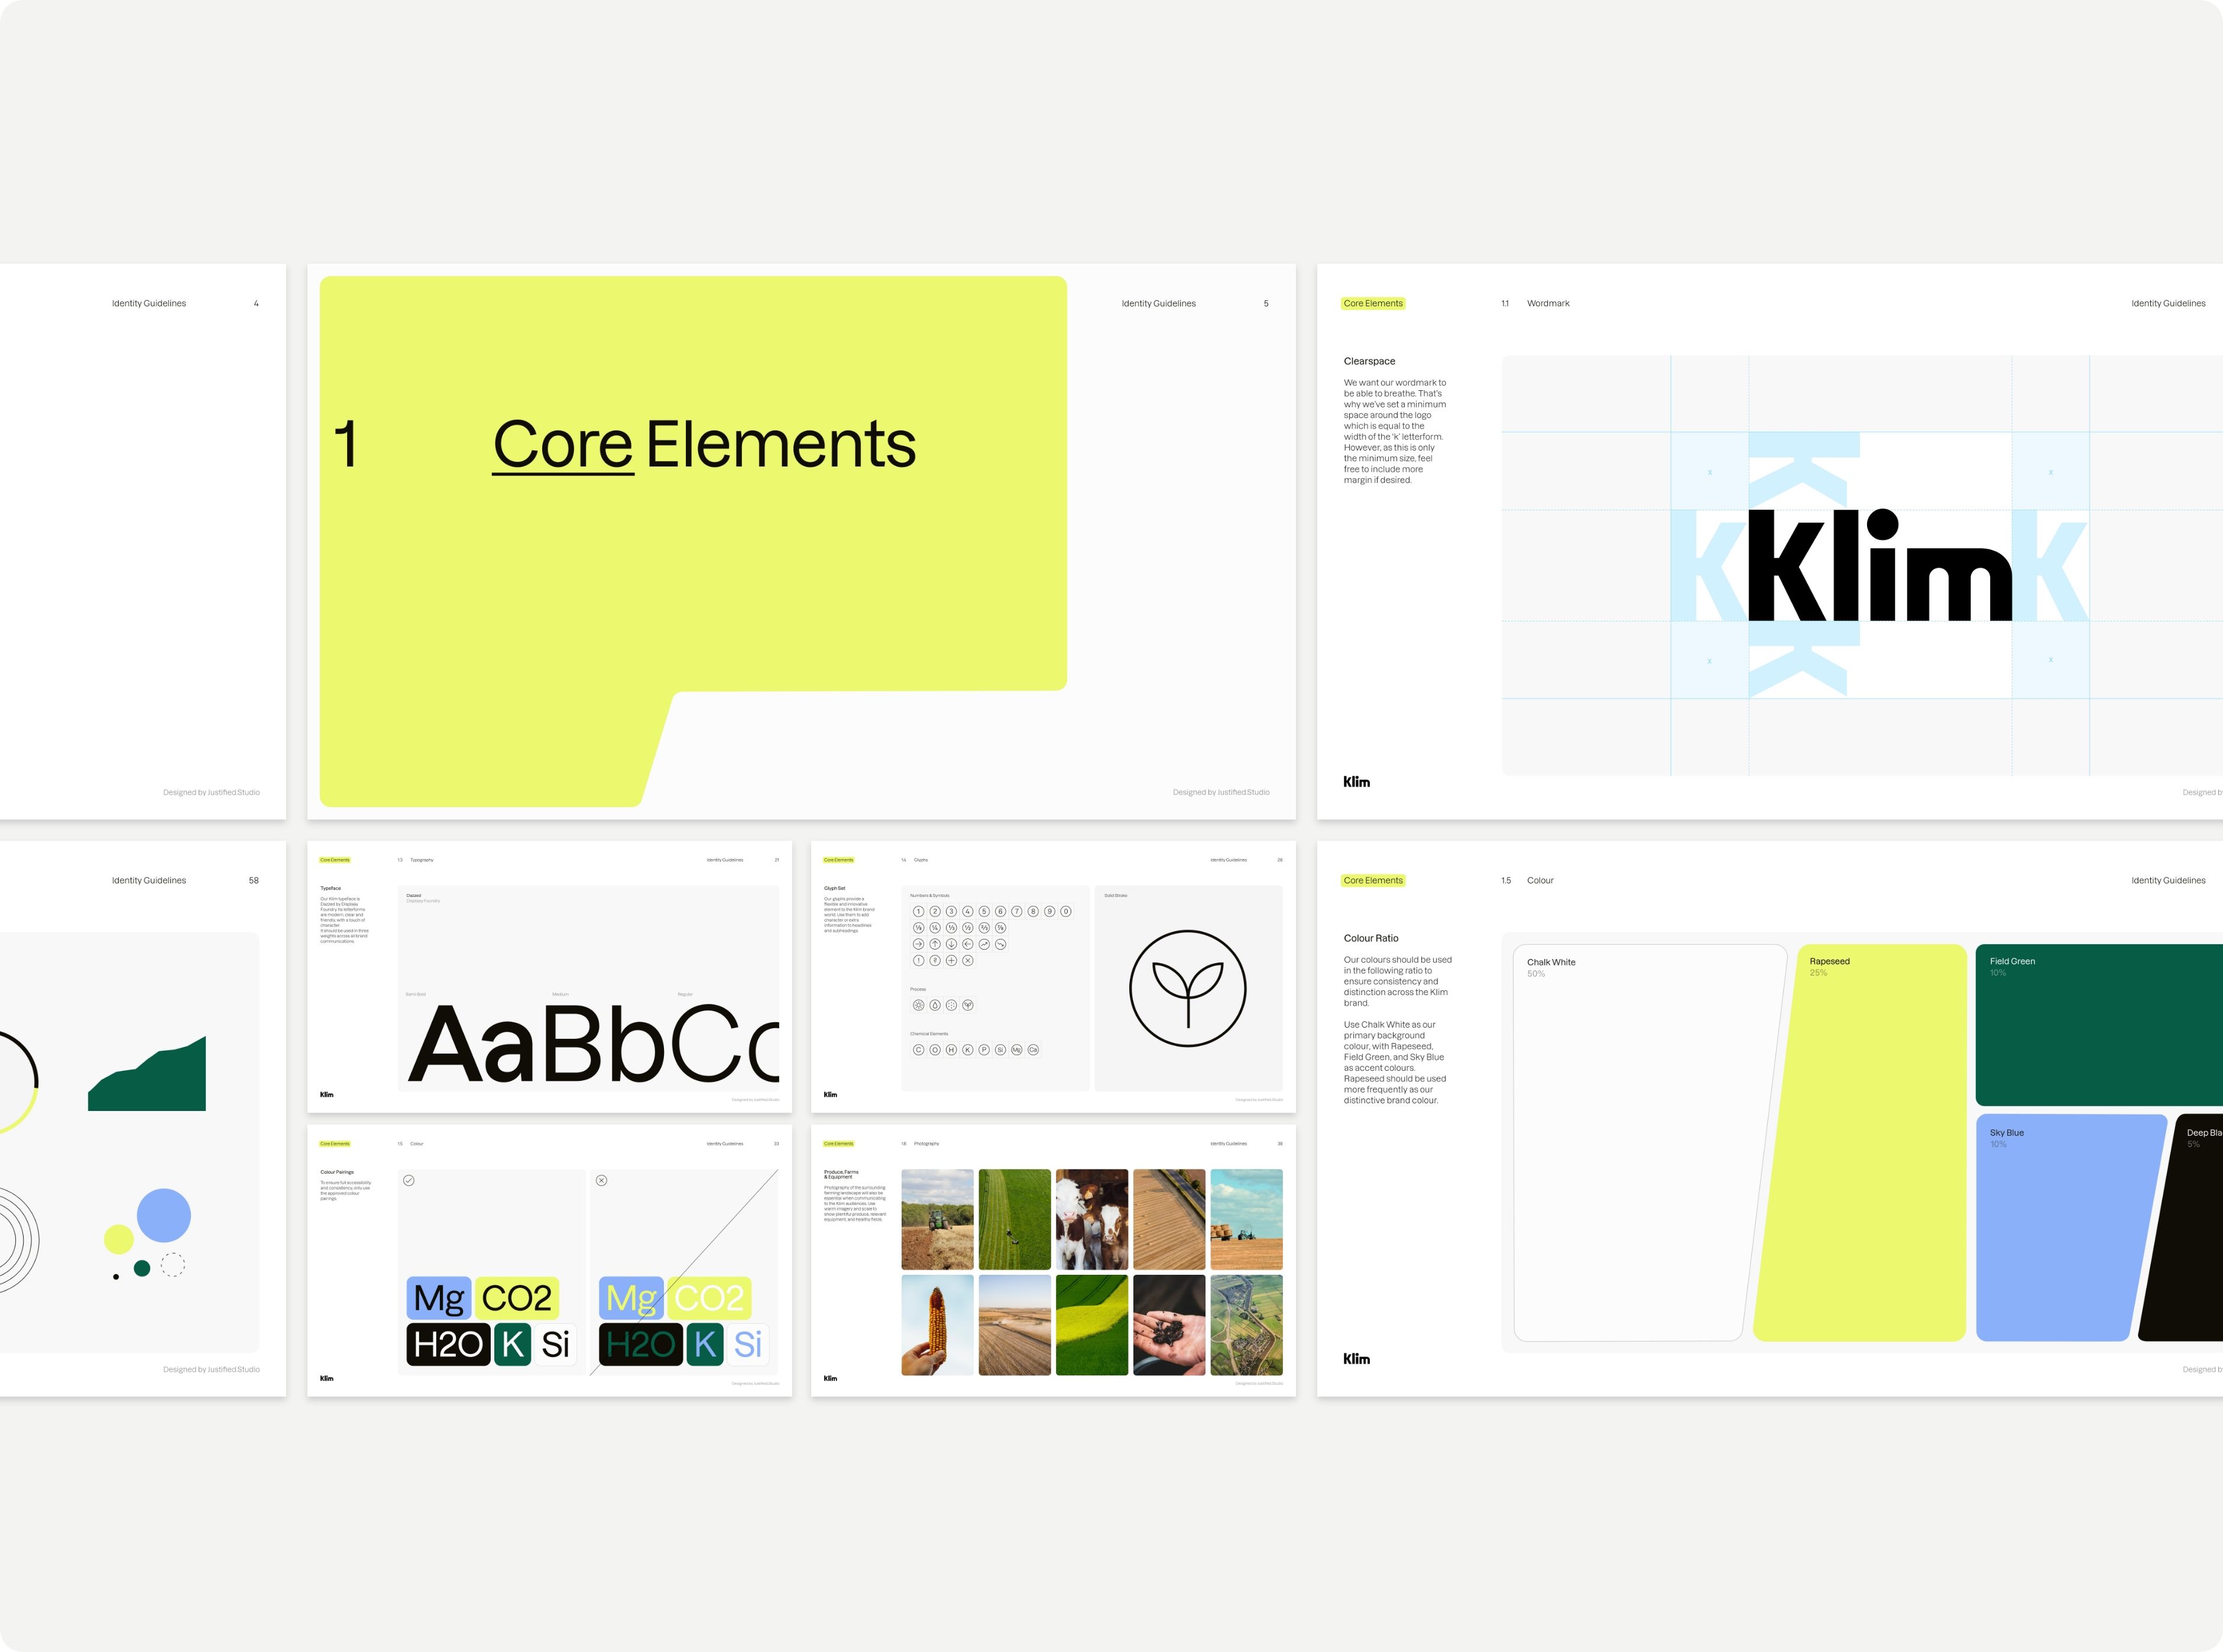 Overview of Klim brand guidelines.